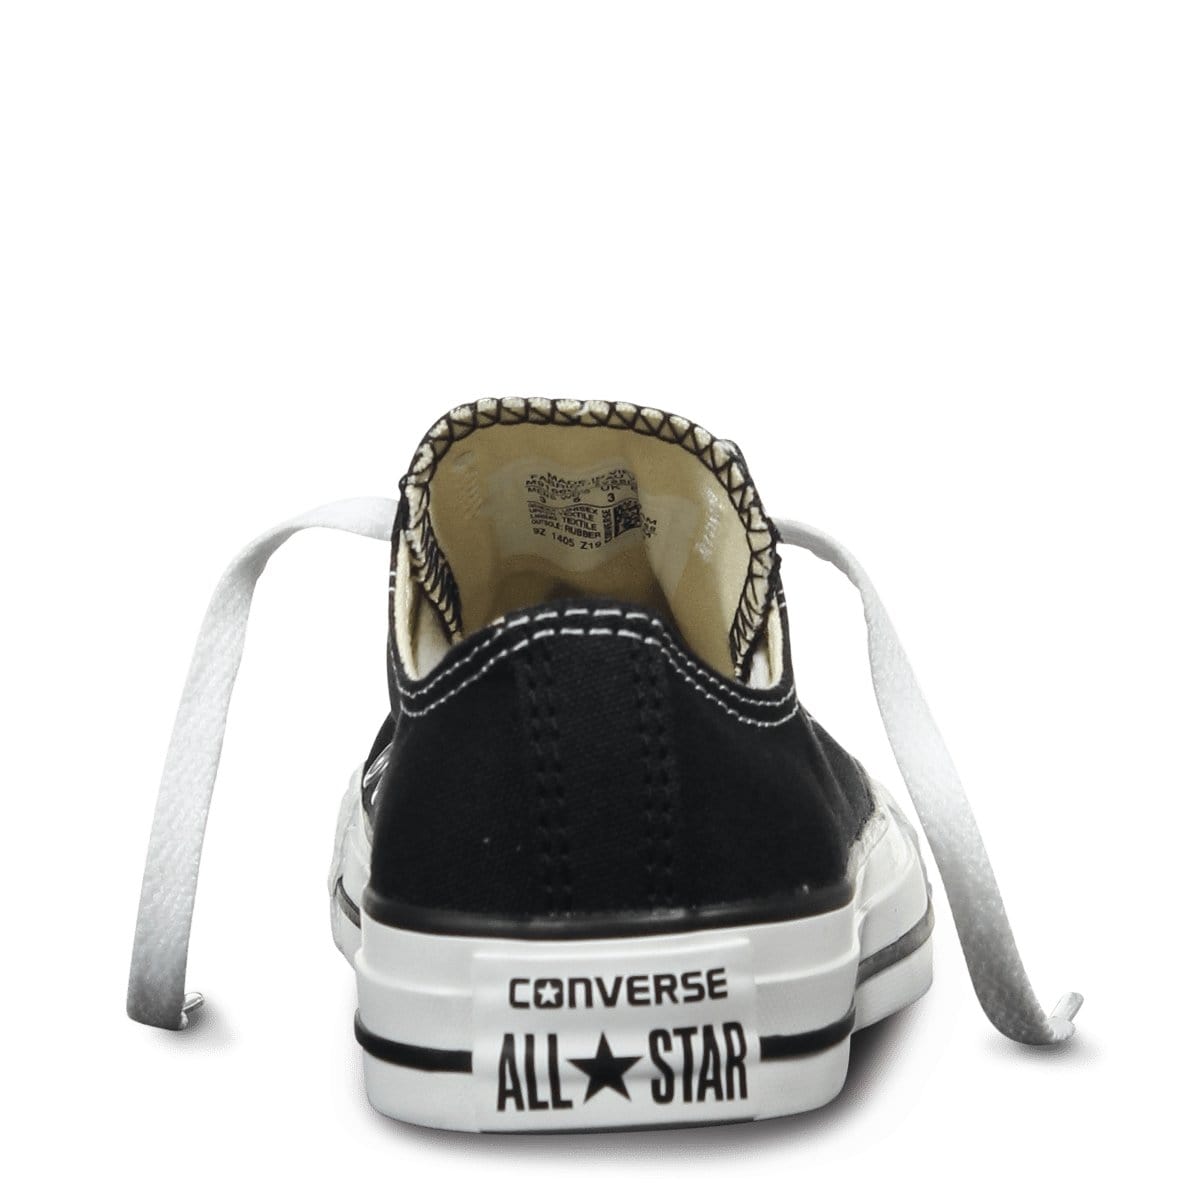 Converse CONVERSE WOMEN'S CHUCK TAYLOR ALL STAR LOW TOP BLACK/WHITE SHOE - INSPORT